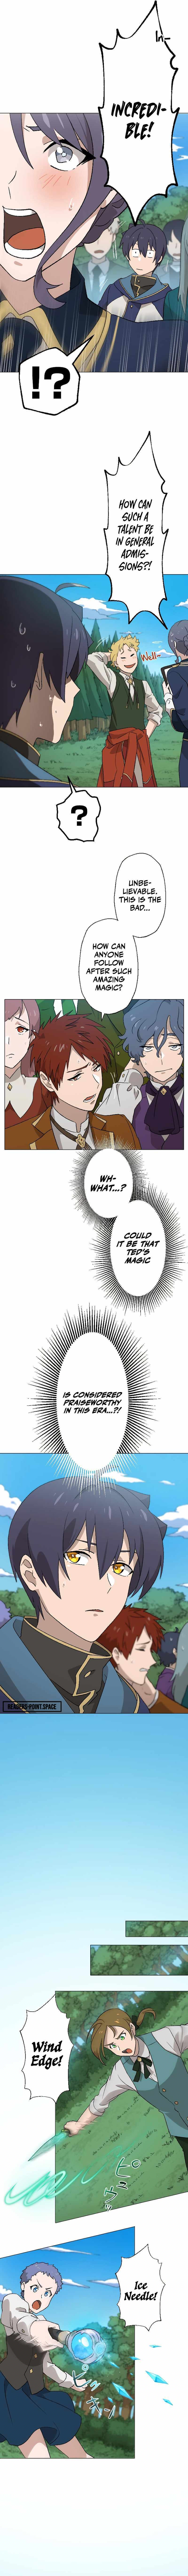 The Reincarnated Magician with Inferior Eyes ~The Oppressed Ex-Hero Survives the Future World with Ease~ - chapter 10 - #6